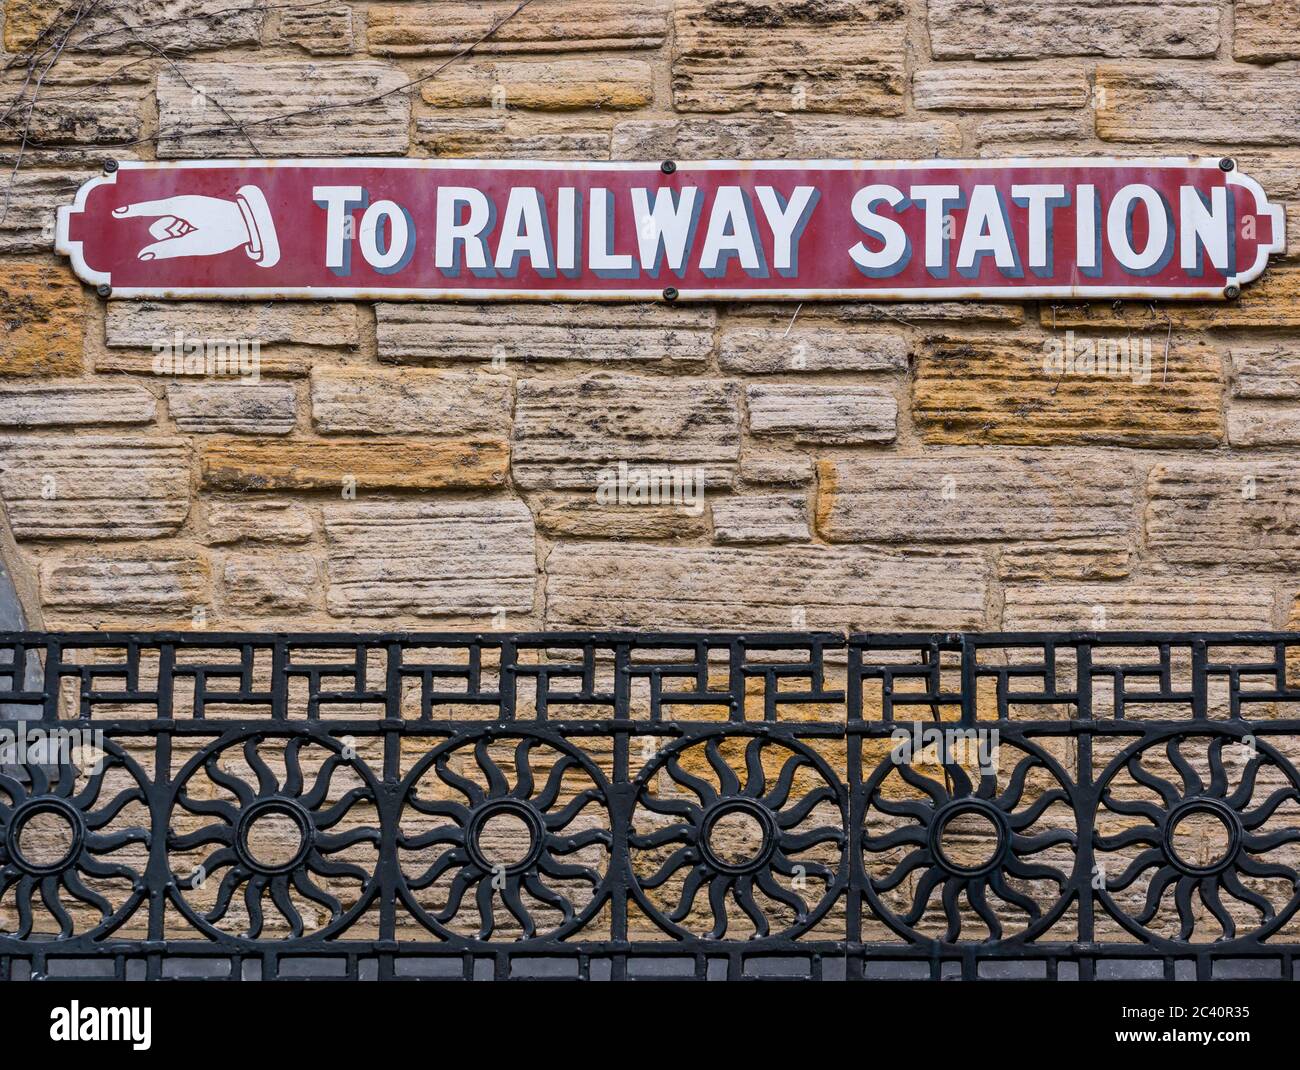 Old fashioned vintage sign on wall with hand pointing to railway station, England, United Kingdom Stock Photo